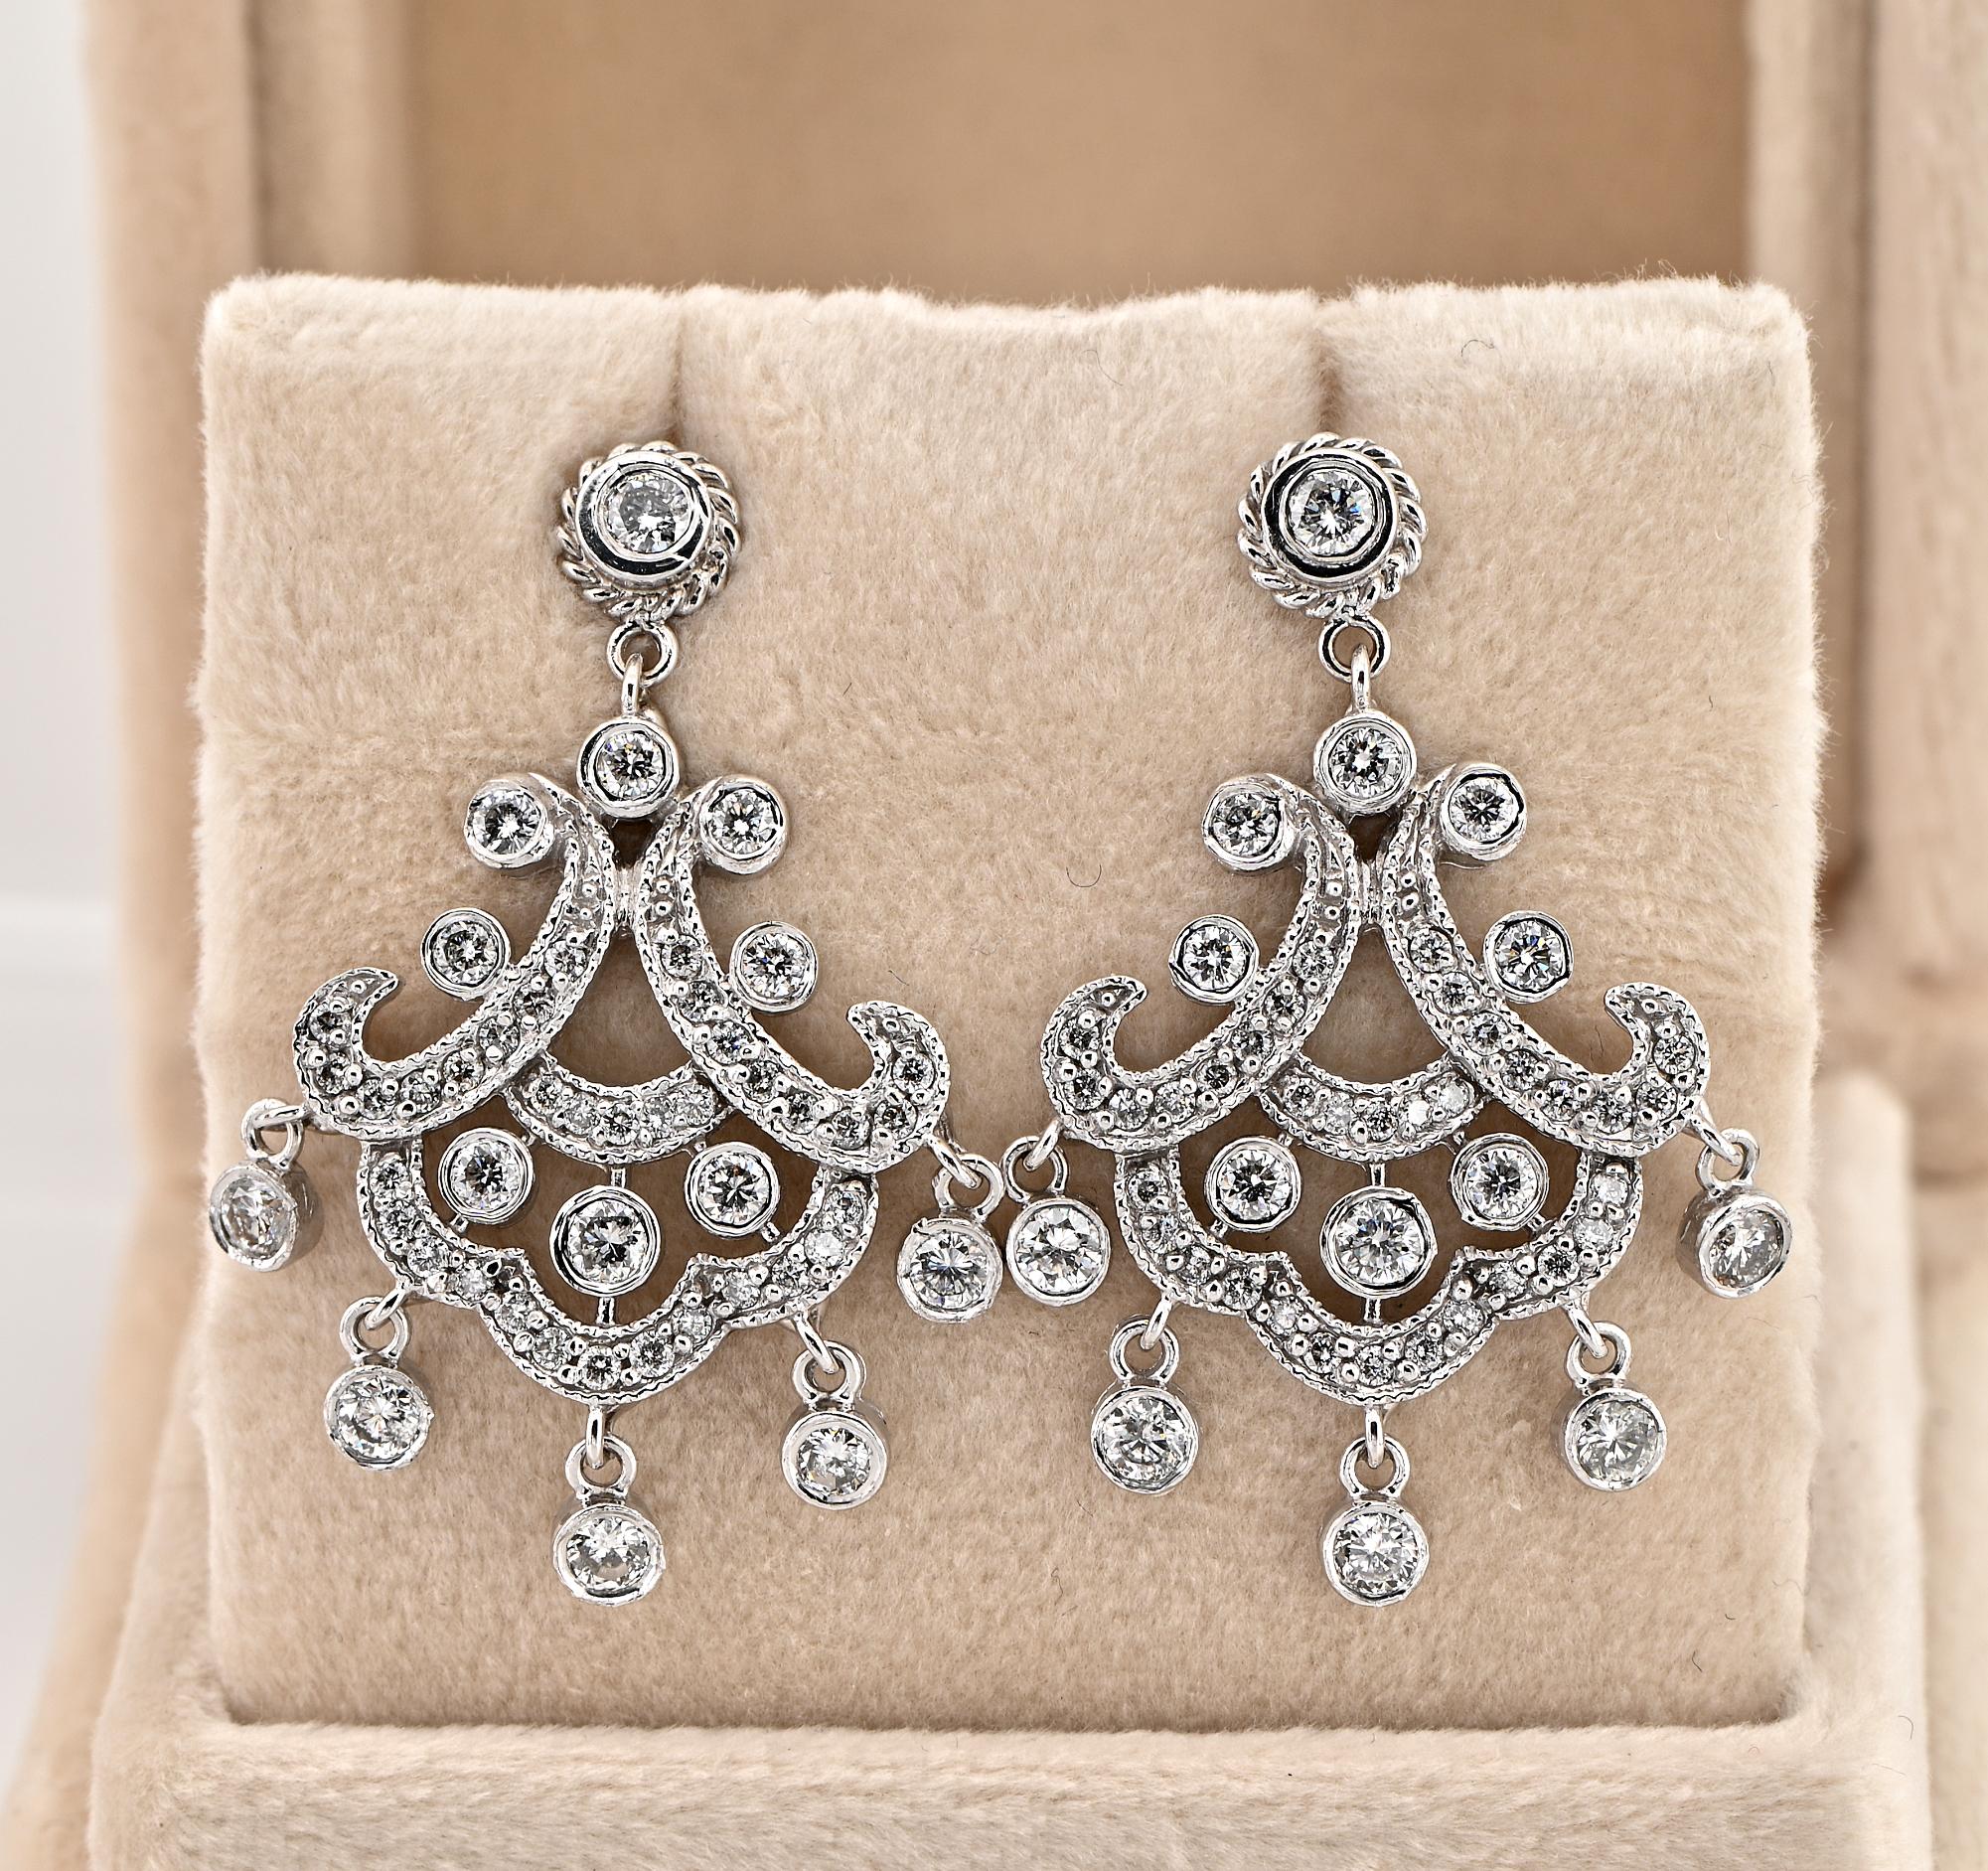 Feel Beautiful
These superb vintage earrings are 1960 ca or slightly later
Exquisitely rendered of solid 14 Kt white gold in a superlative timeless Chandelier design that for sure will highlight your face up with lovely bright sparkle and joyful